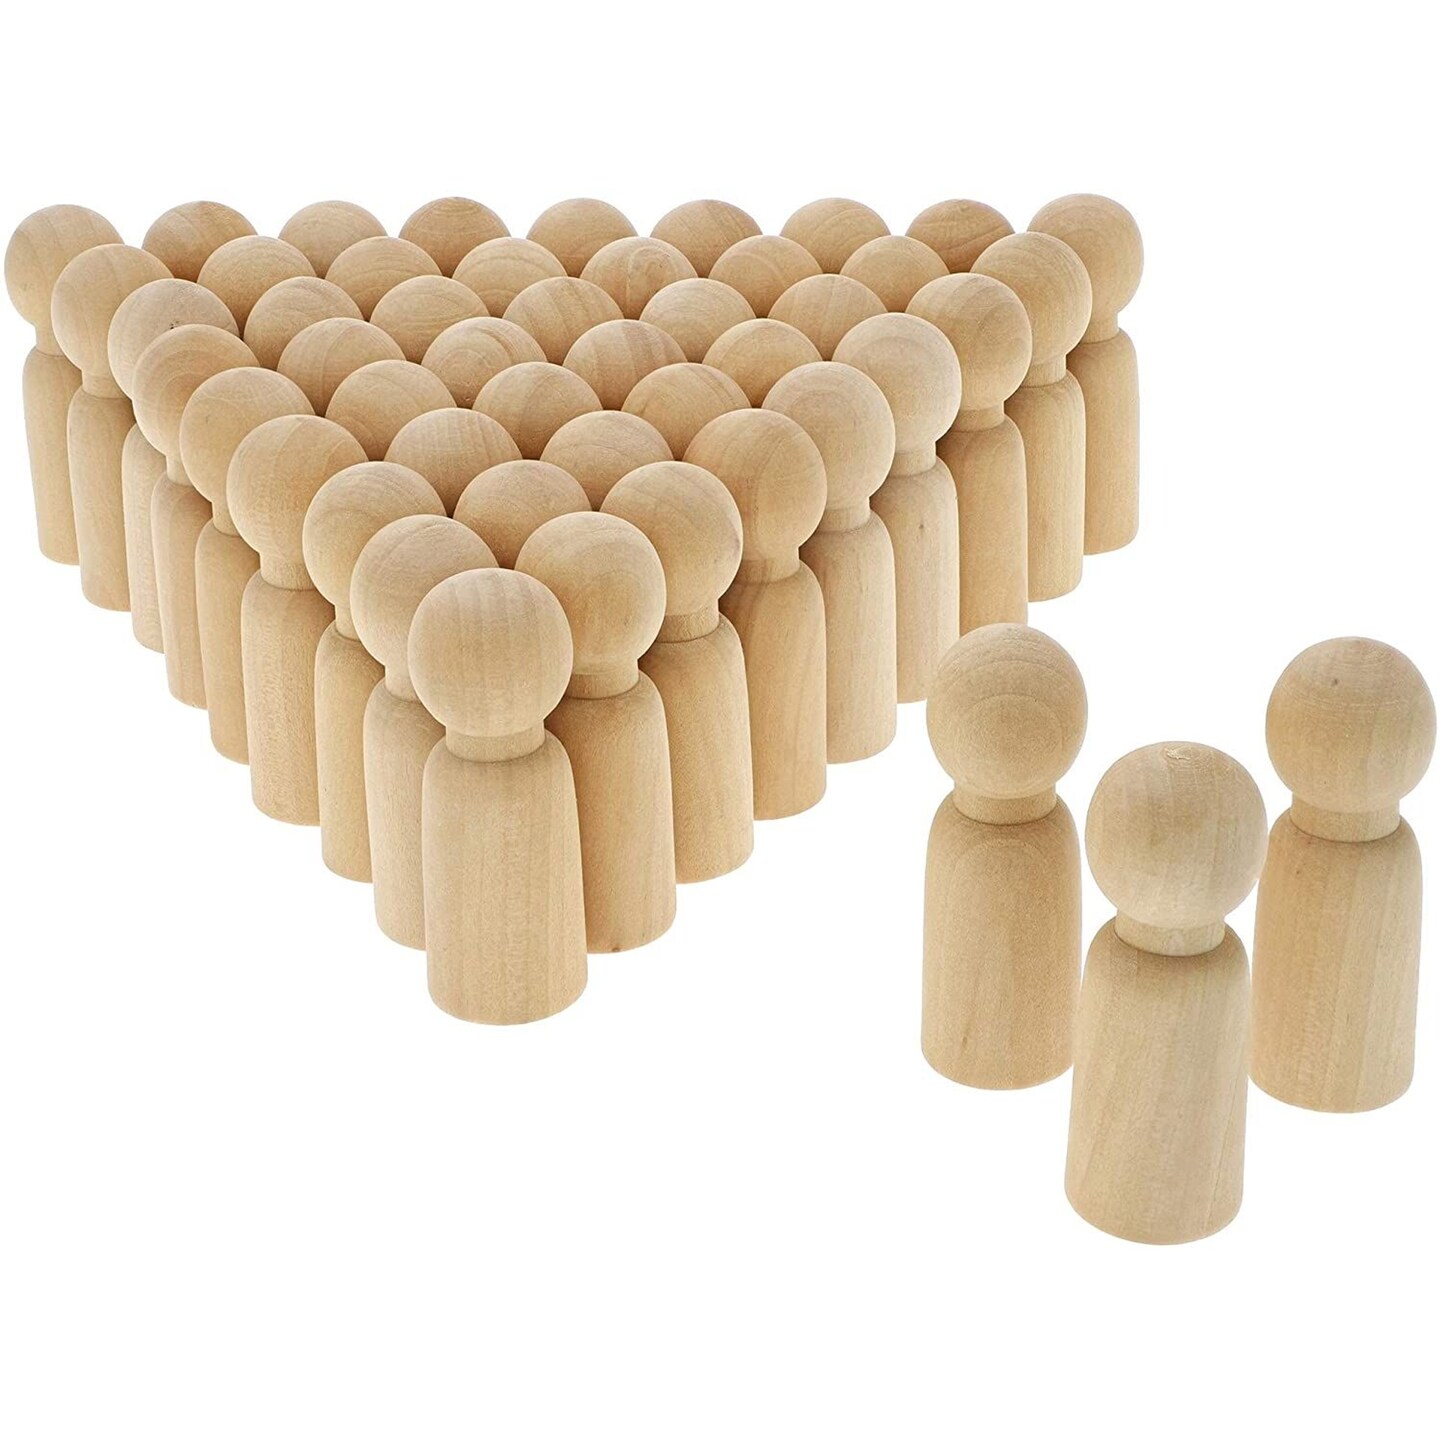 50 Pack Unfinished Wooden Peg Doll Bodies, Natural Wood Figures for Painting, DIY Arts and Crafts, 2.4 inches Tall